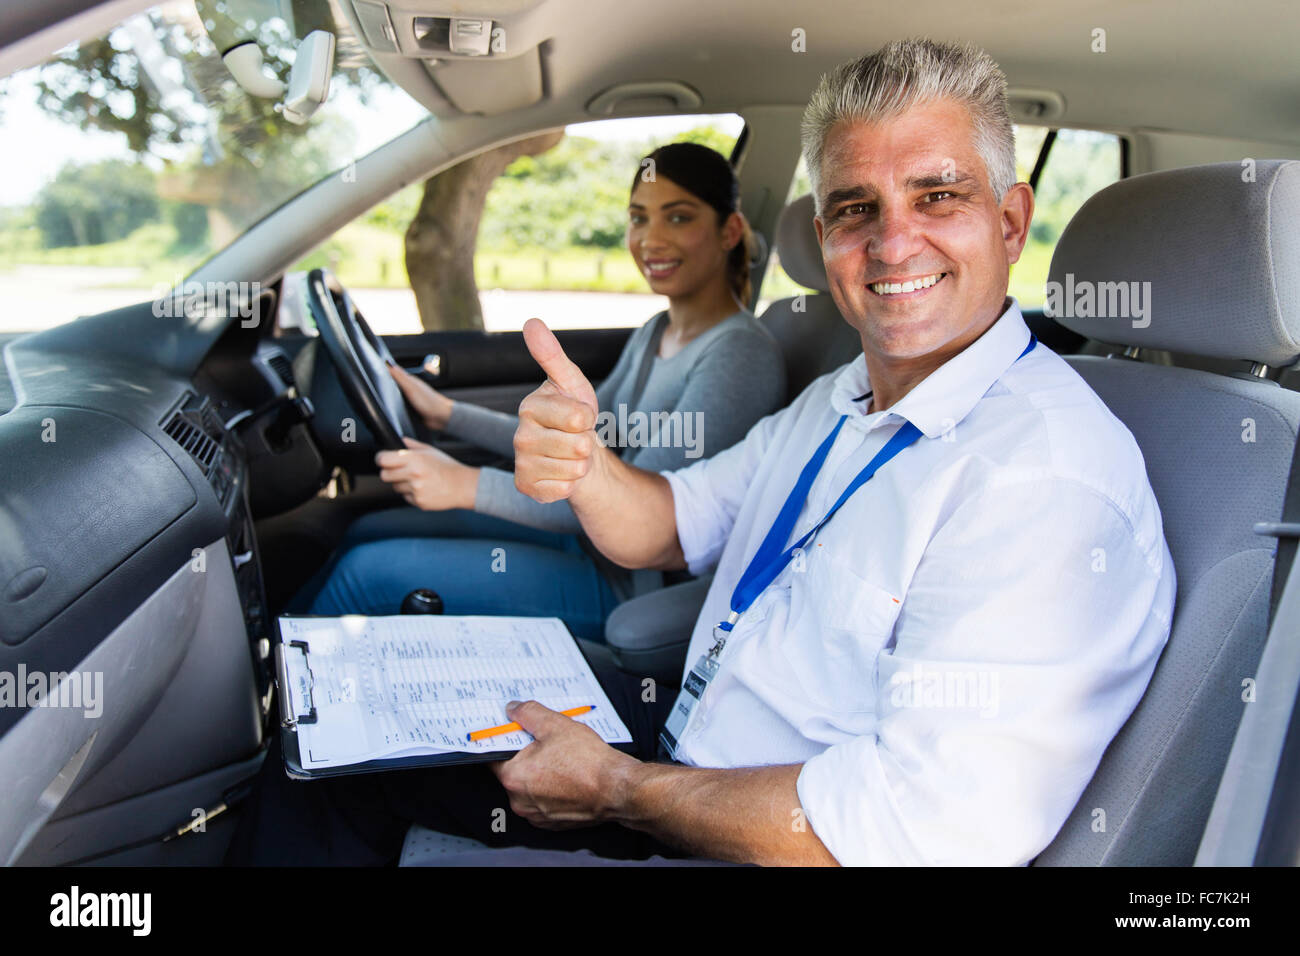 smiling senior male driving instructor in a car with learner driver giving thumb up Stock Photo